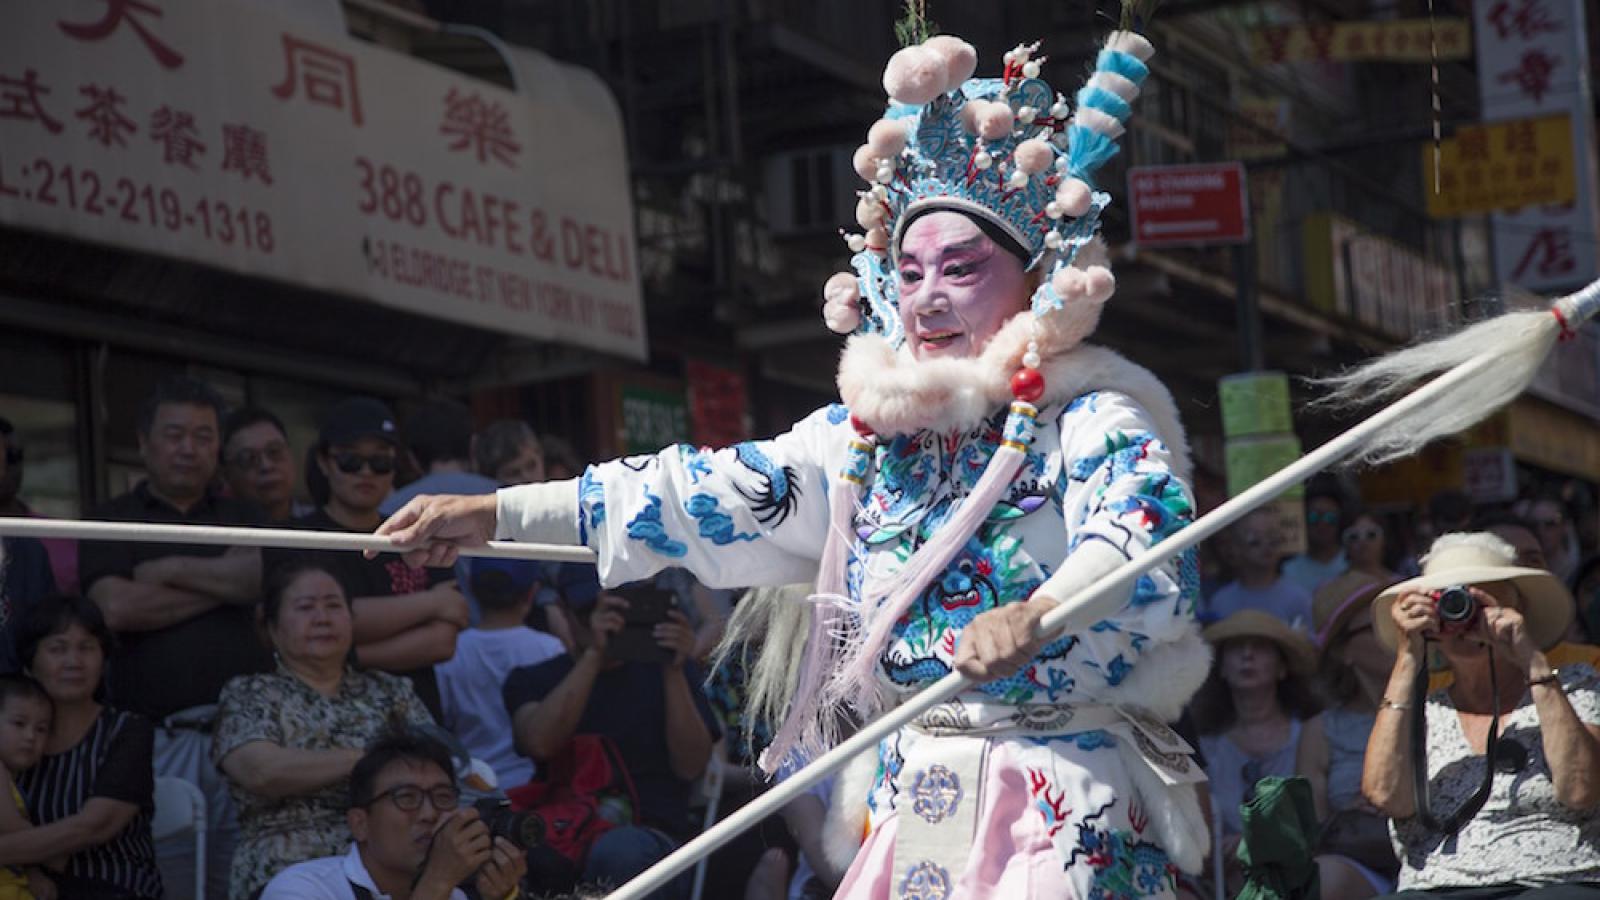 a performer during a parade wears traditional Chinese dress